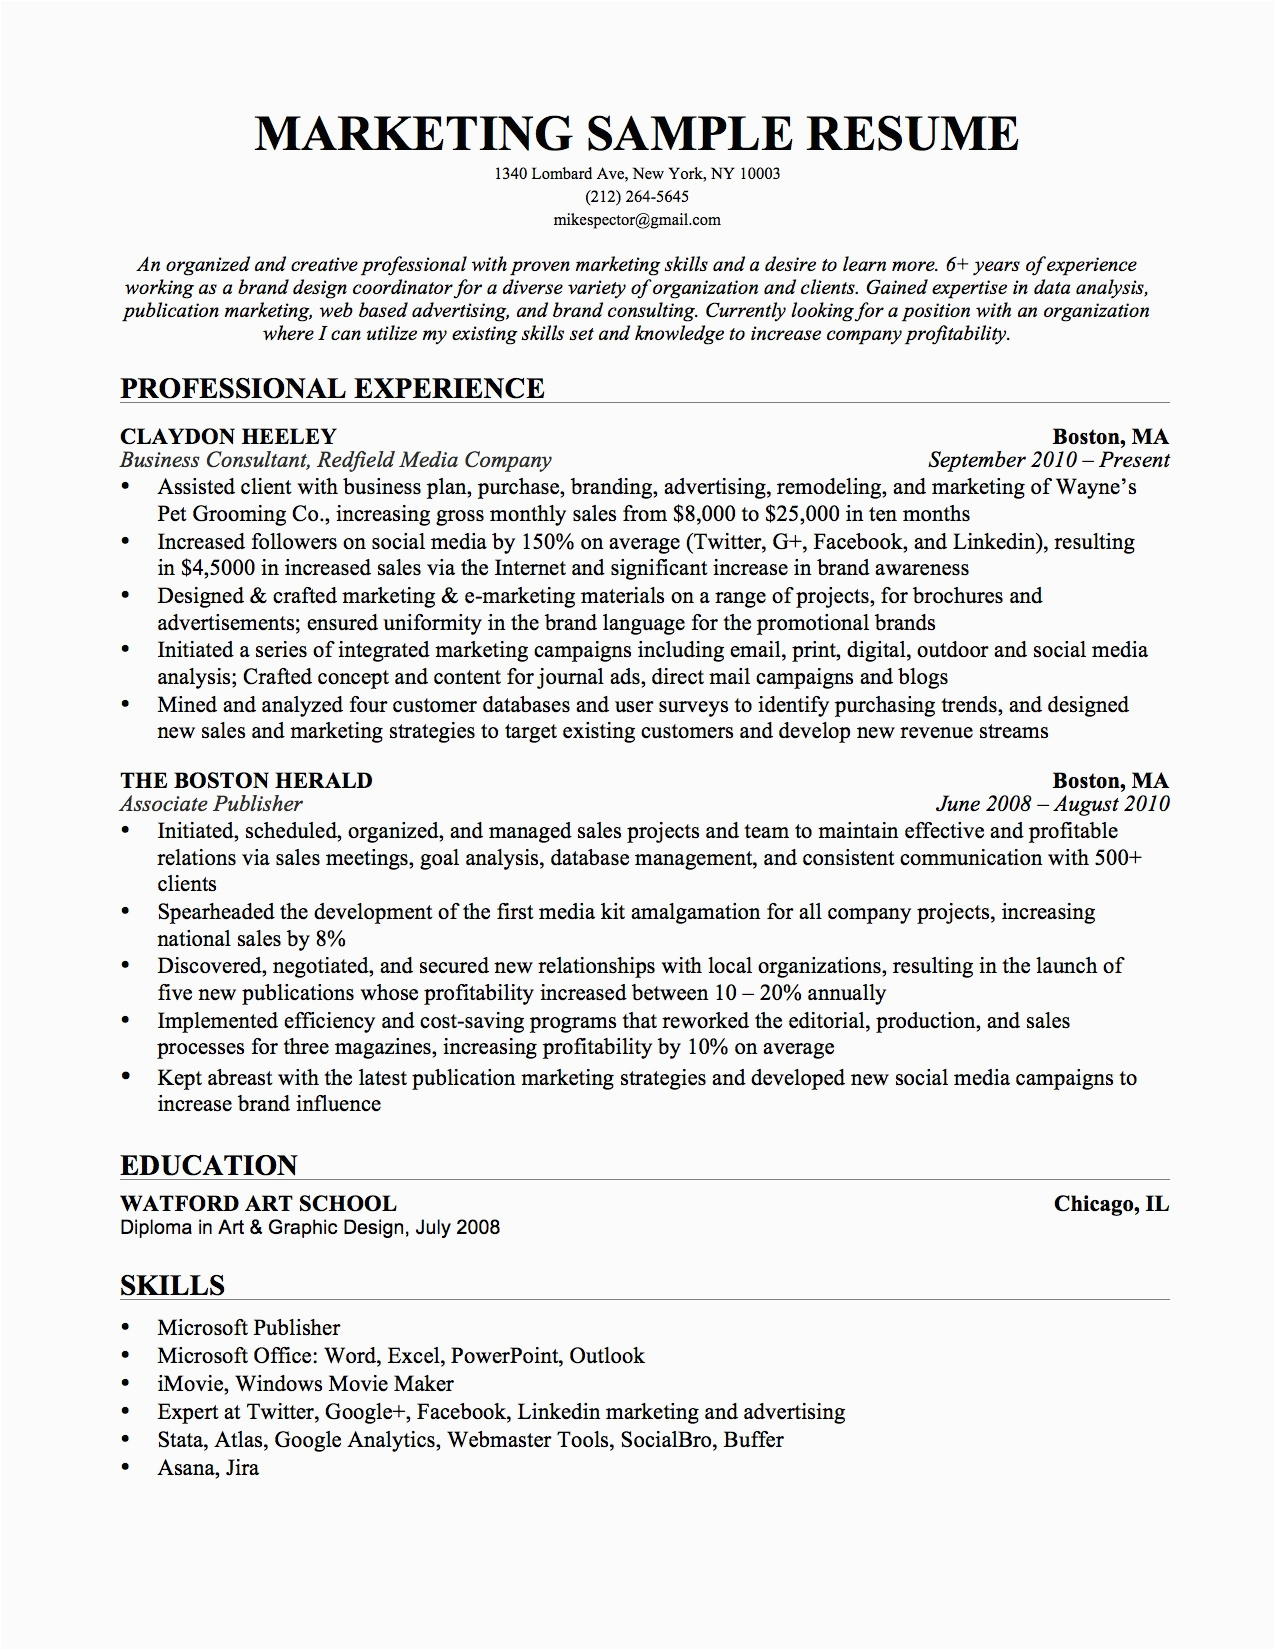 Sample Resume for Sales and Marketing Job Sales Marketing Resume Samples Velvet Jobs